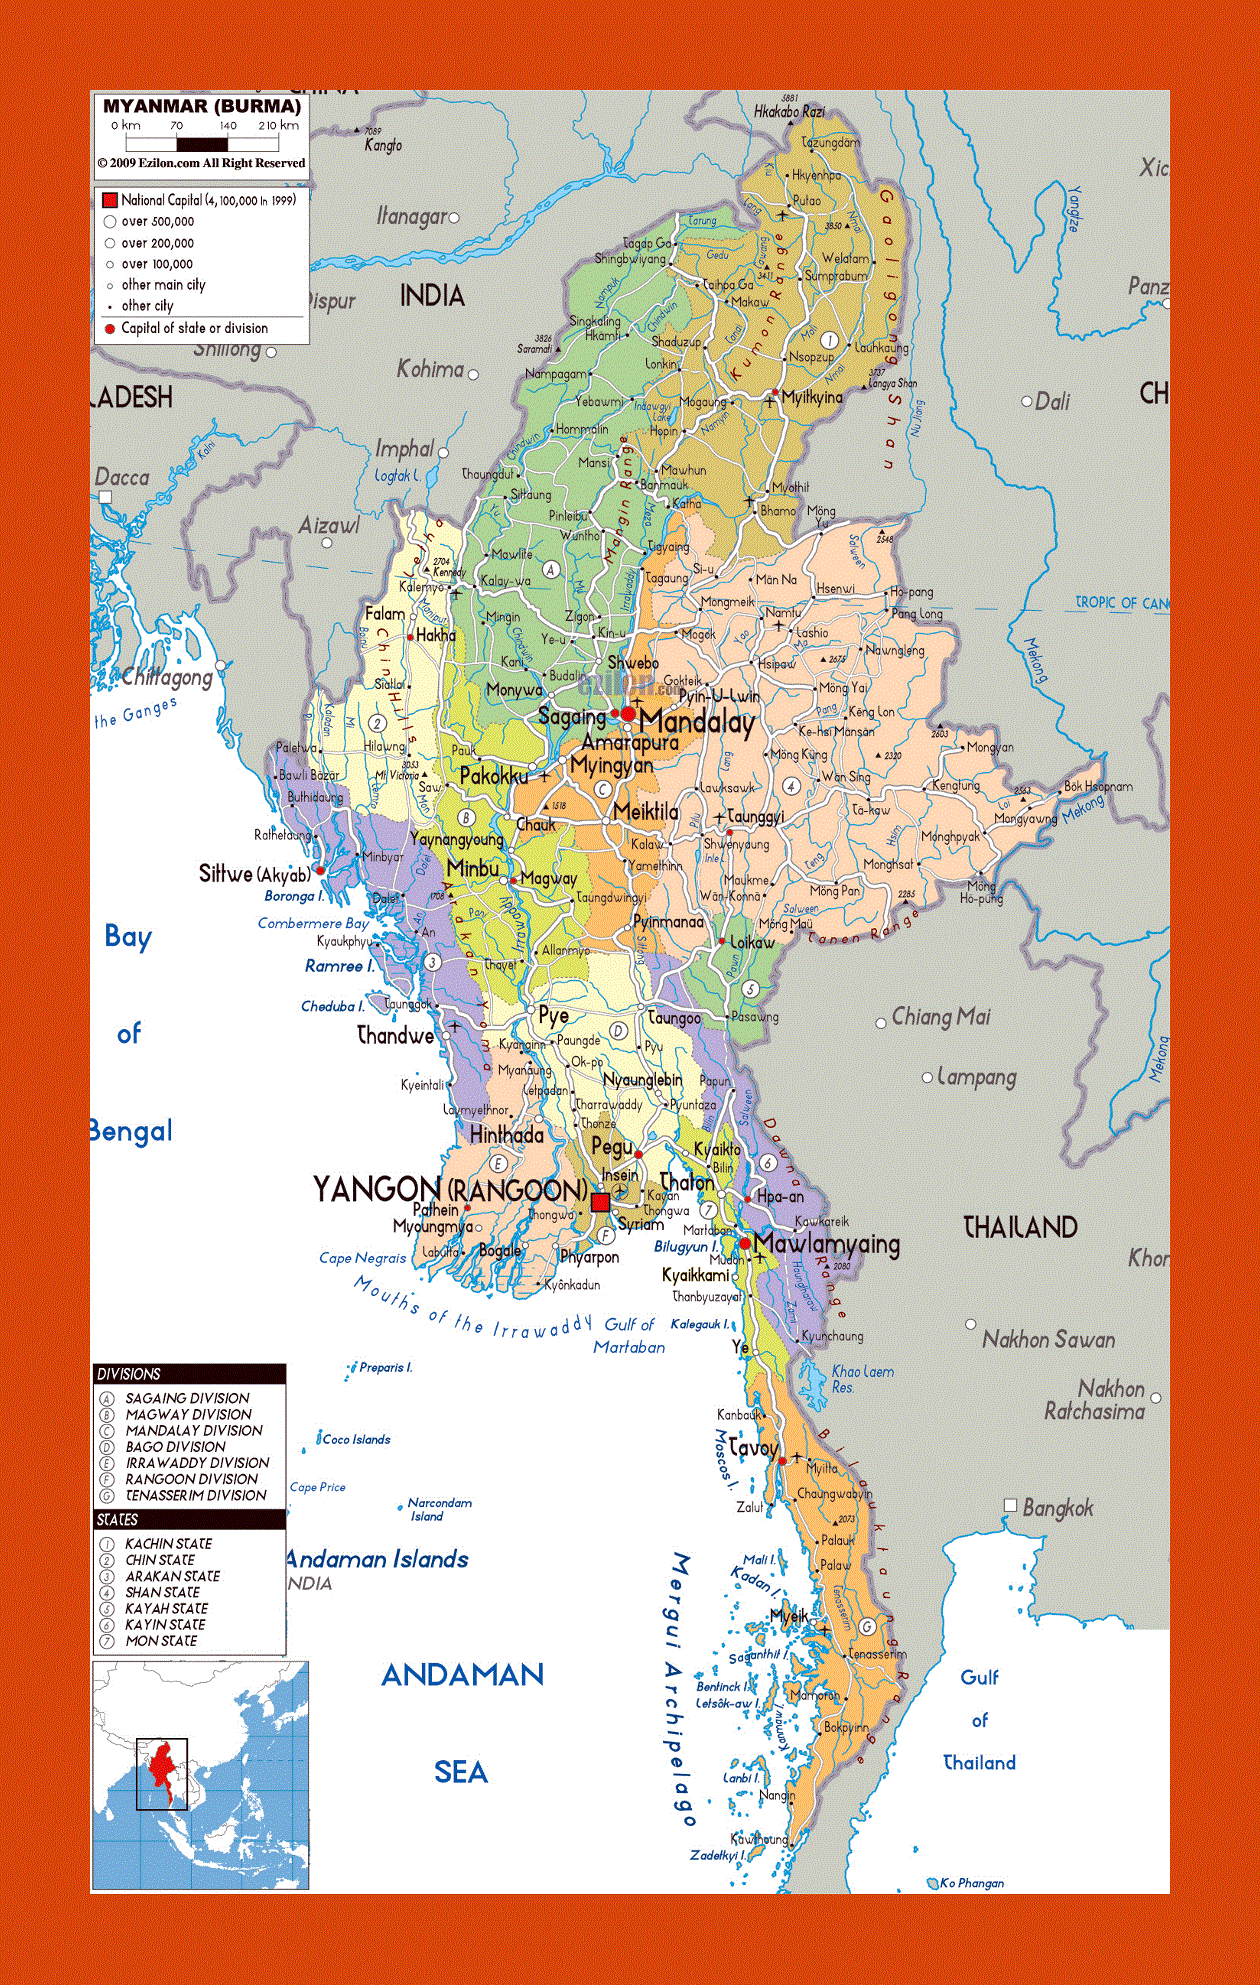 Political and administrative map of Myanmar